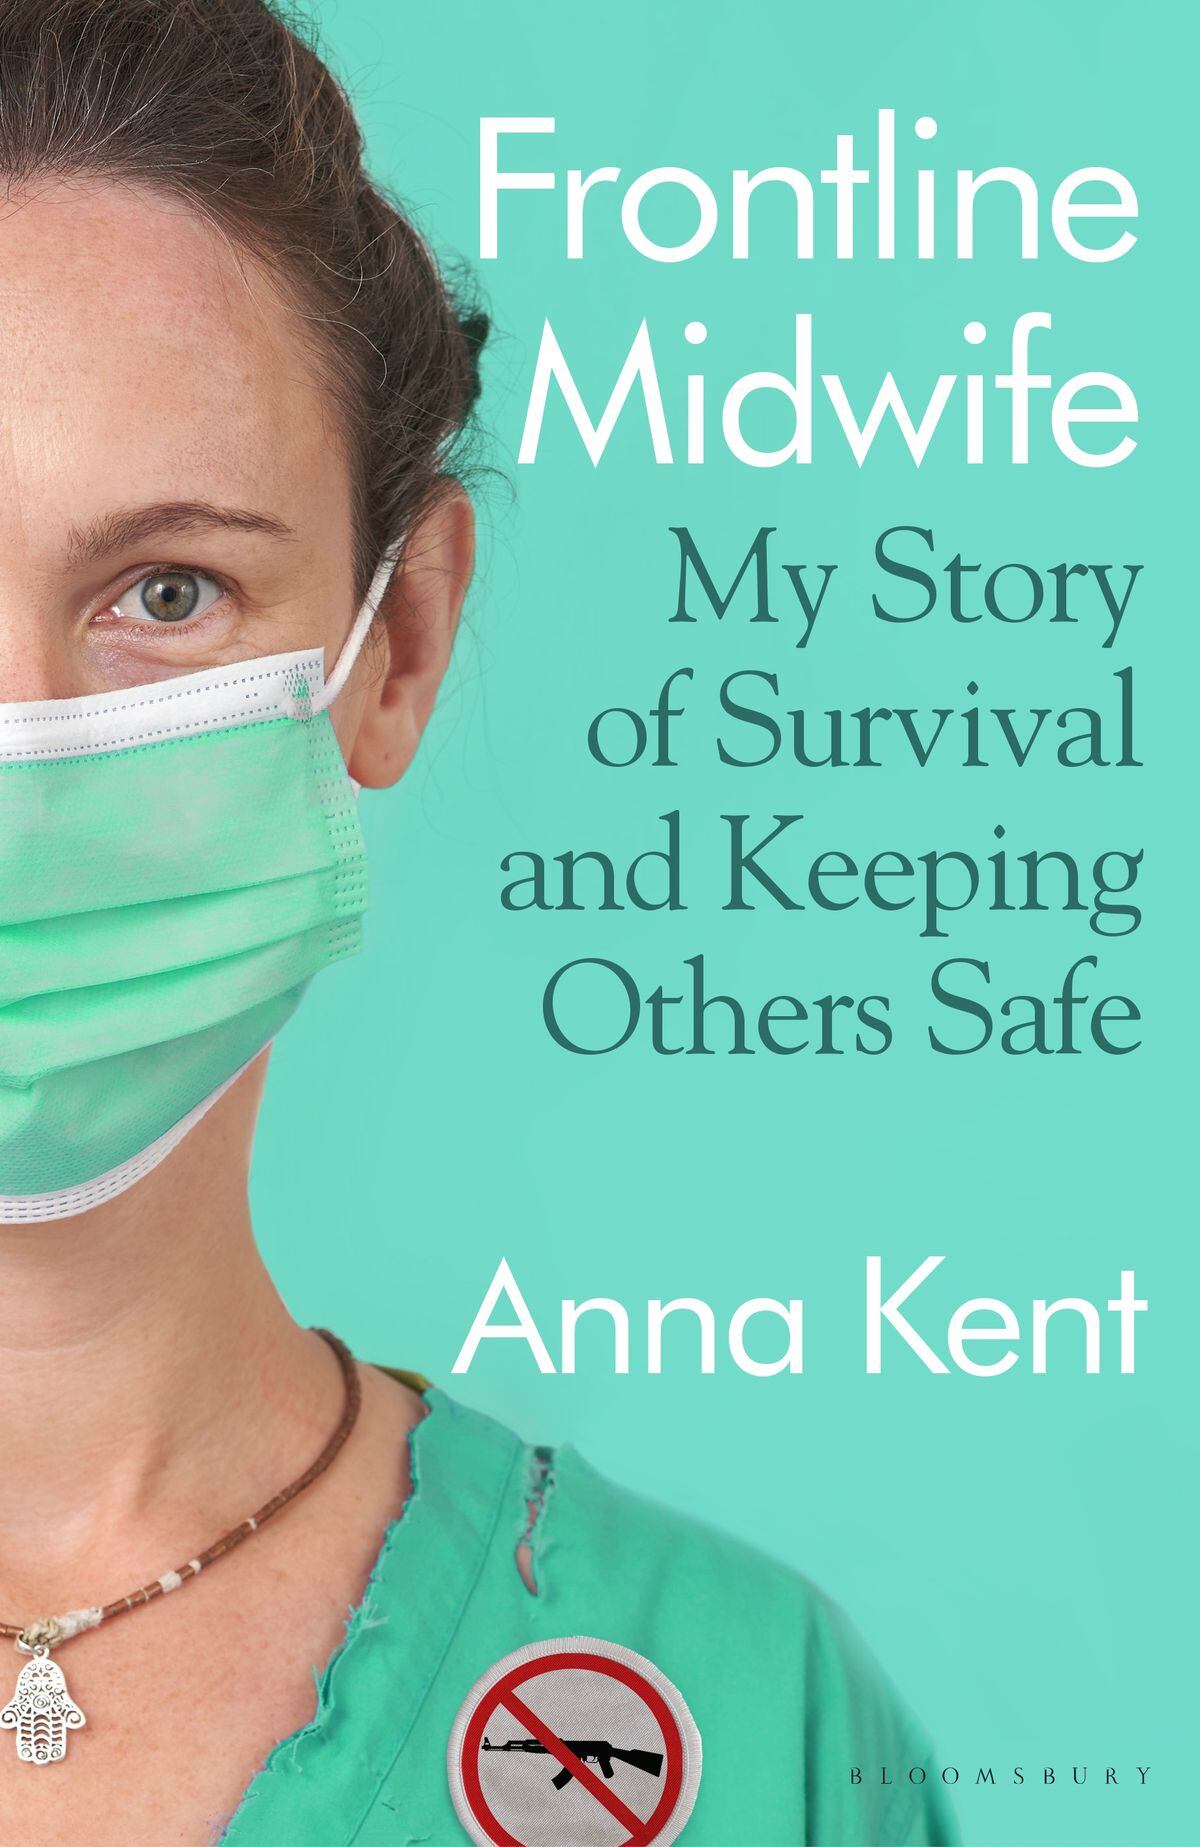 Frontline Midwife by author Anna Kent